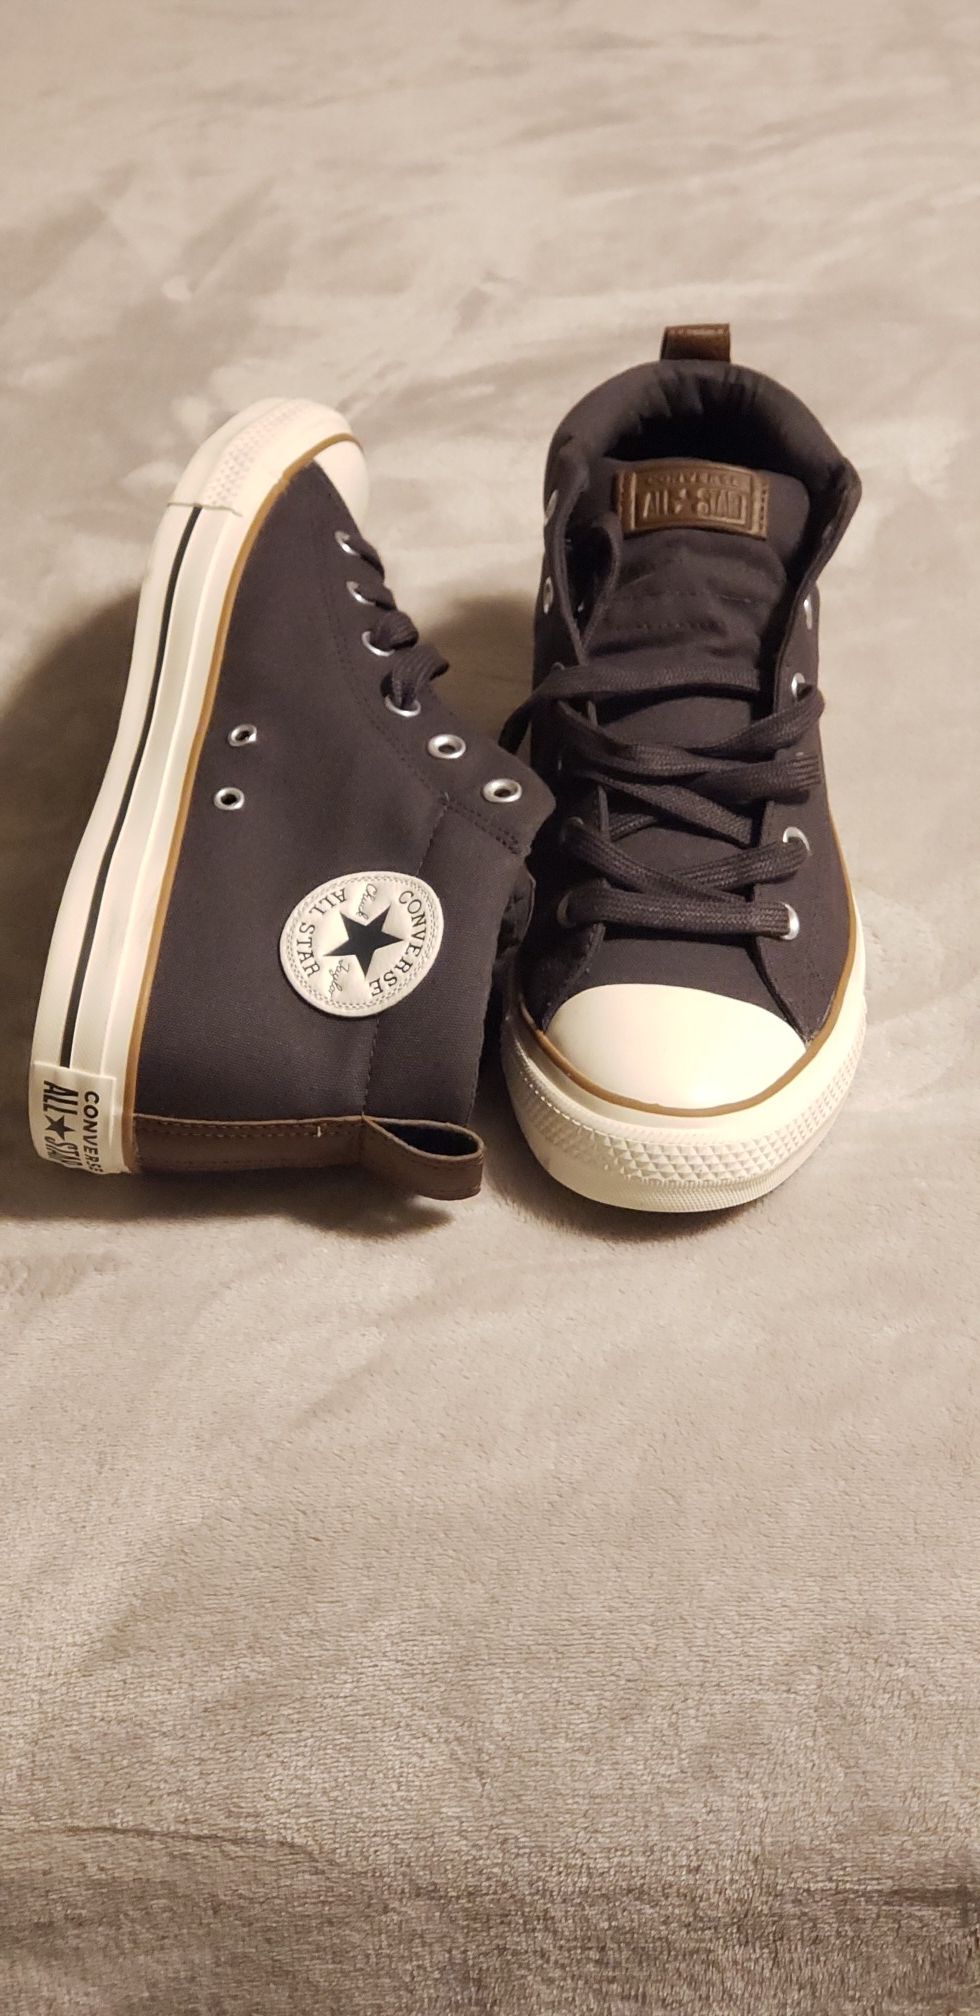 Aunthentic All Star Converse, Low Top.